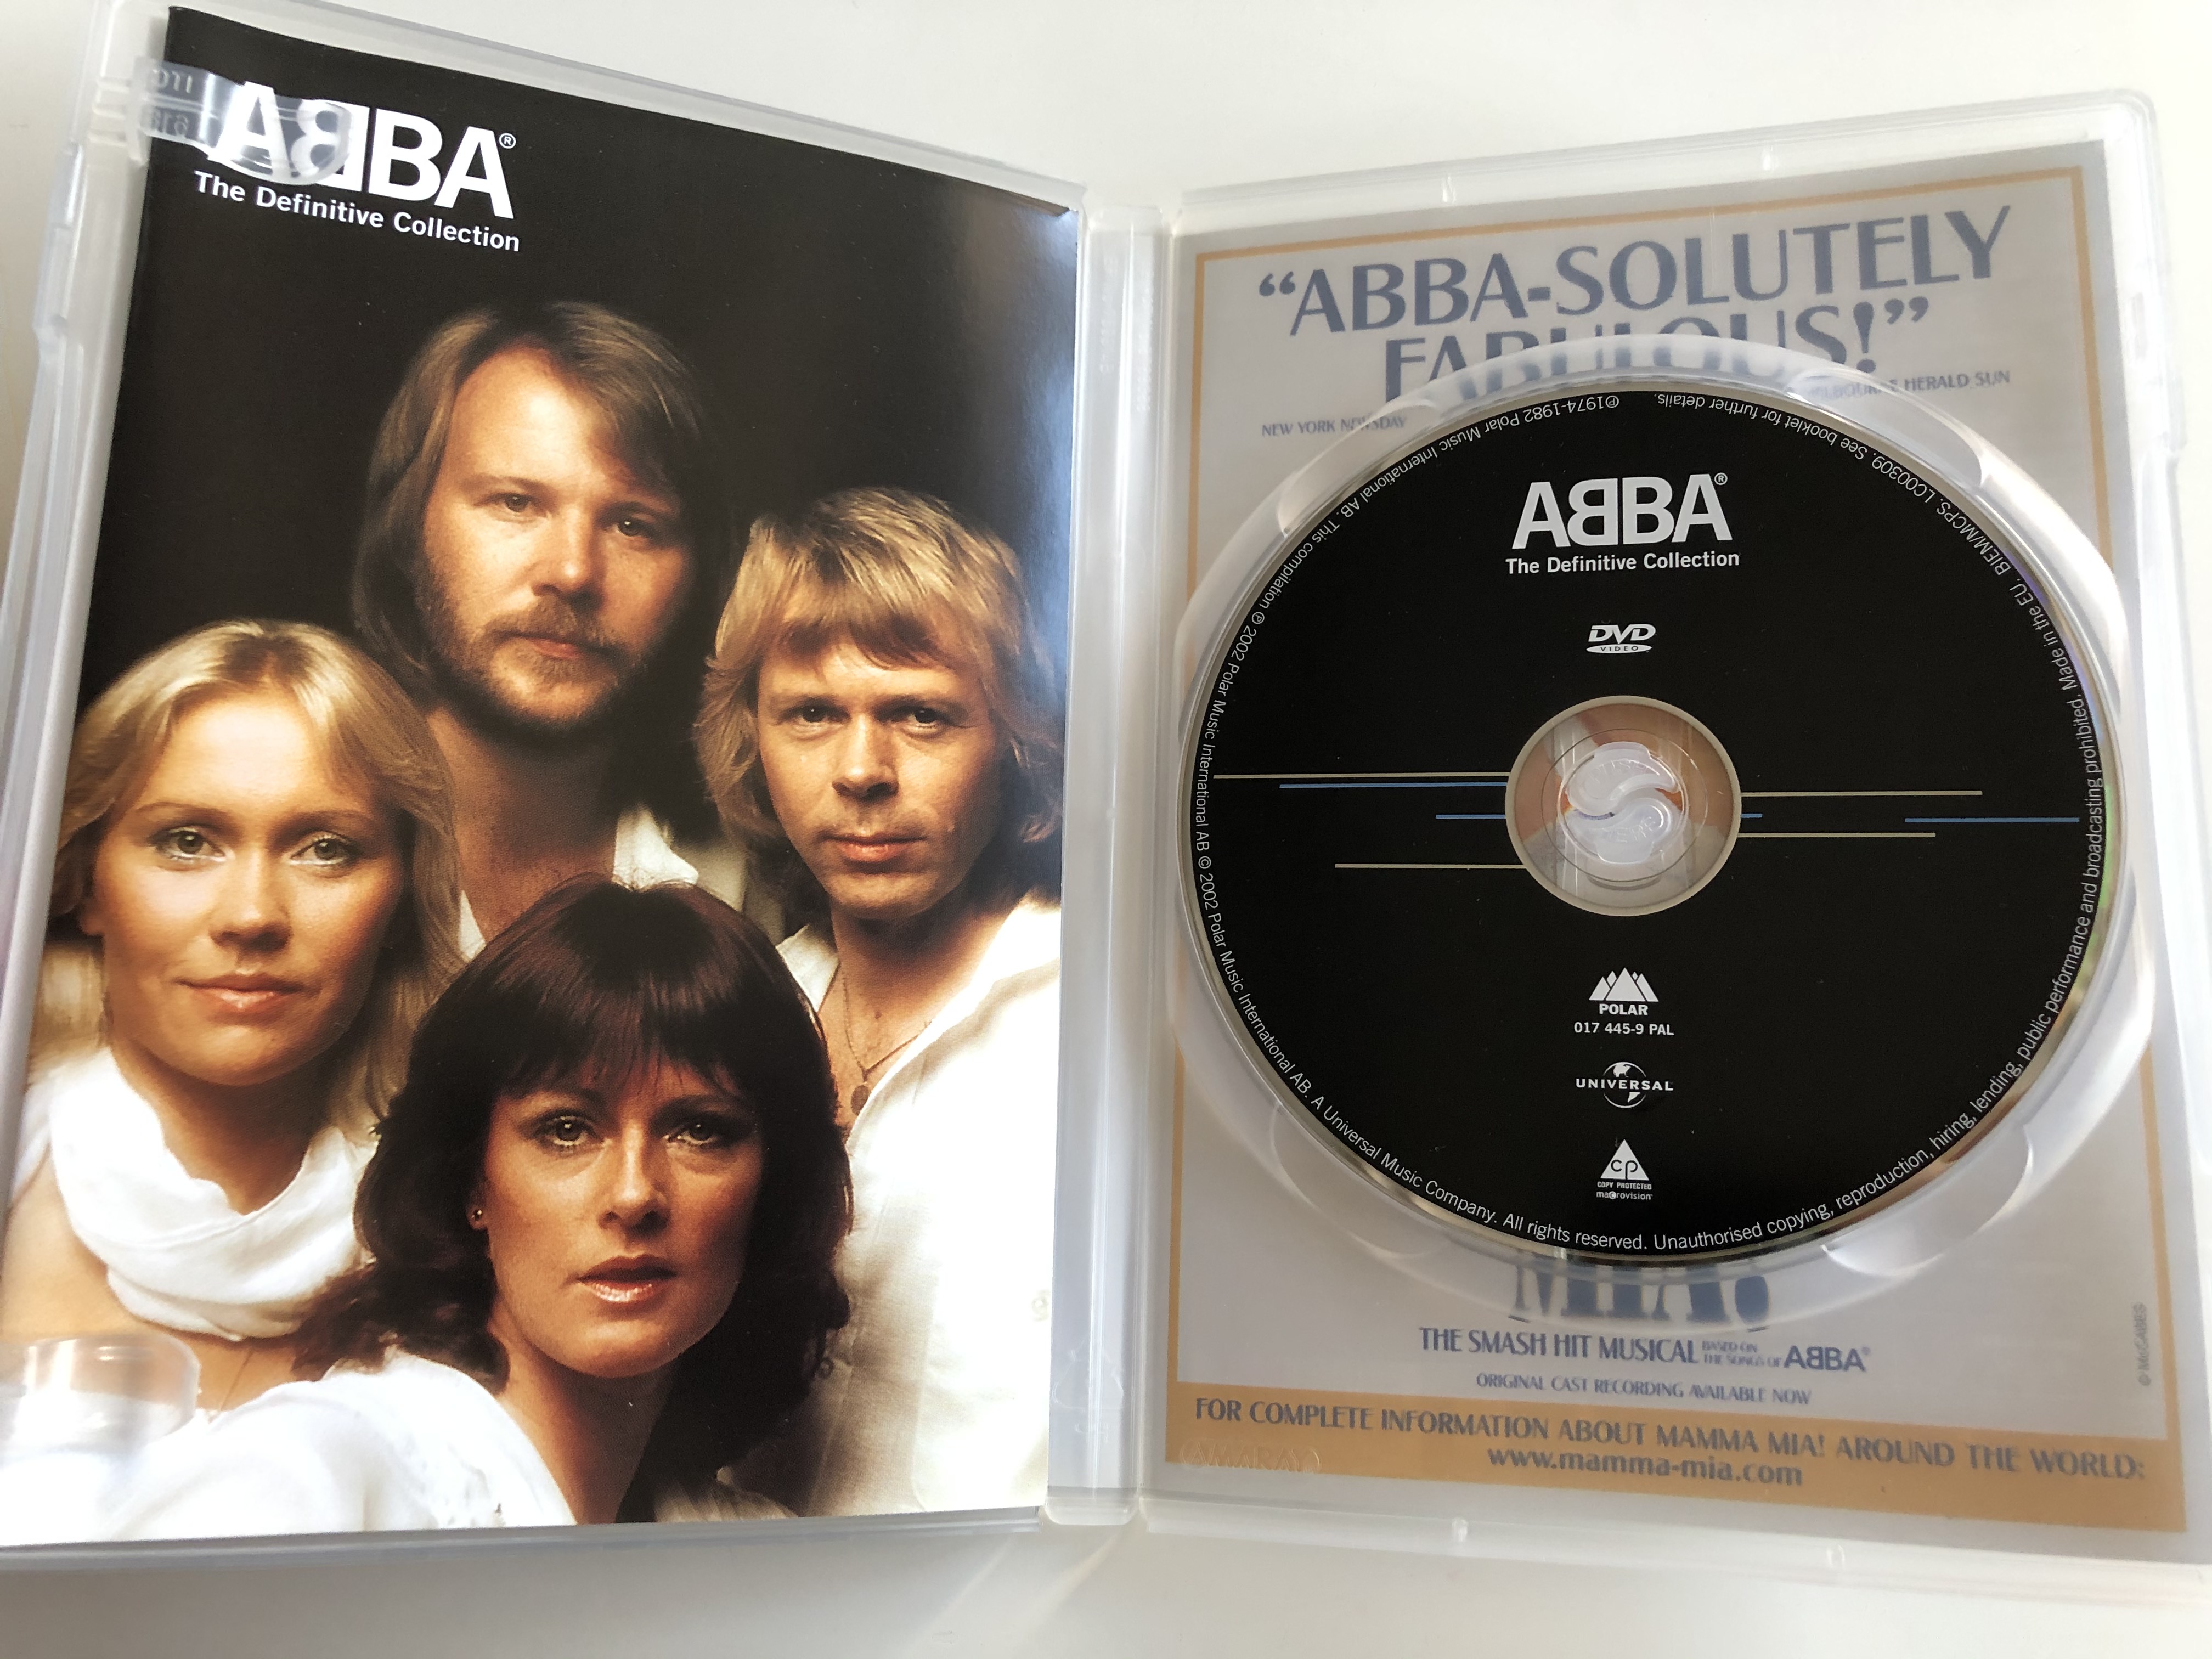 ABBA - The Definitive Collection DVD 2002 / Includes all 30 videos restored  and remastered / Bonus Videos / Polar Music / 017 445-9 - bibleinmylanguage